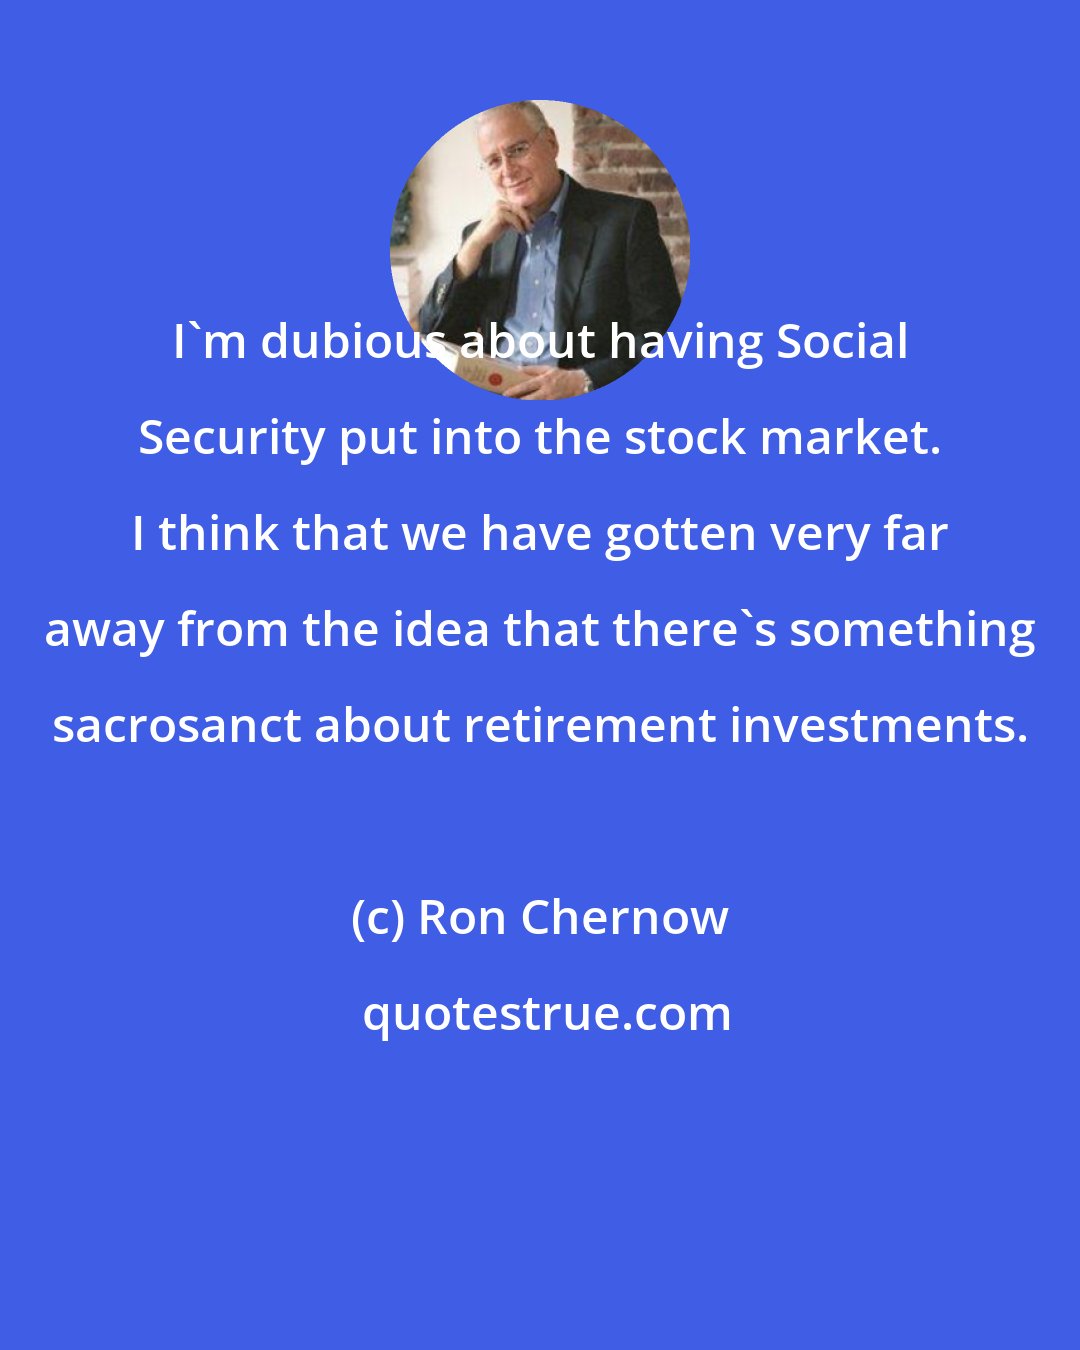 Ron Chernow: I'm dubious about having Social Security put into the stock market. I think that we have gotten very far away from the idea that there's something sacrosanct about retirement investments.